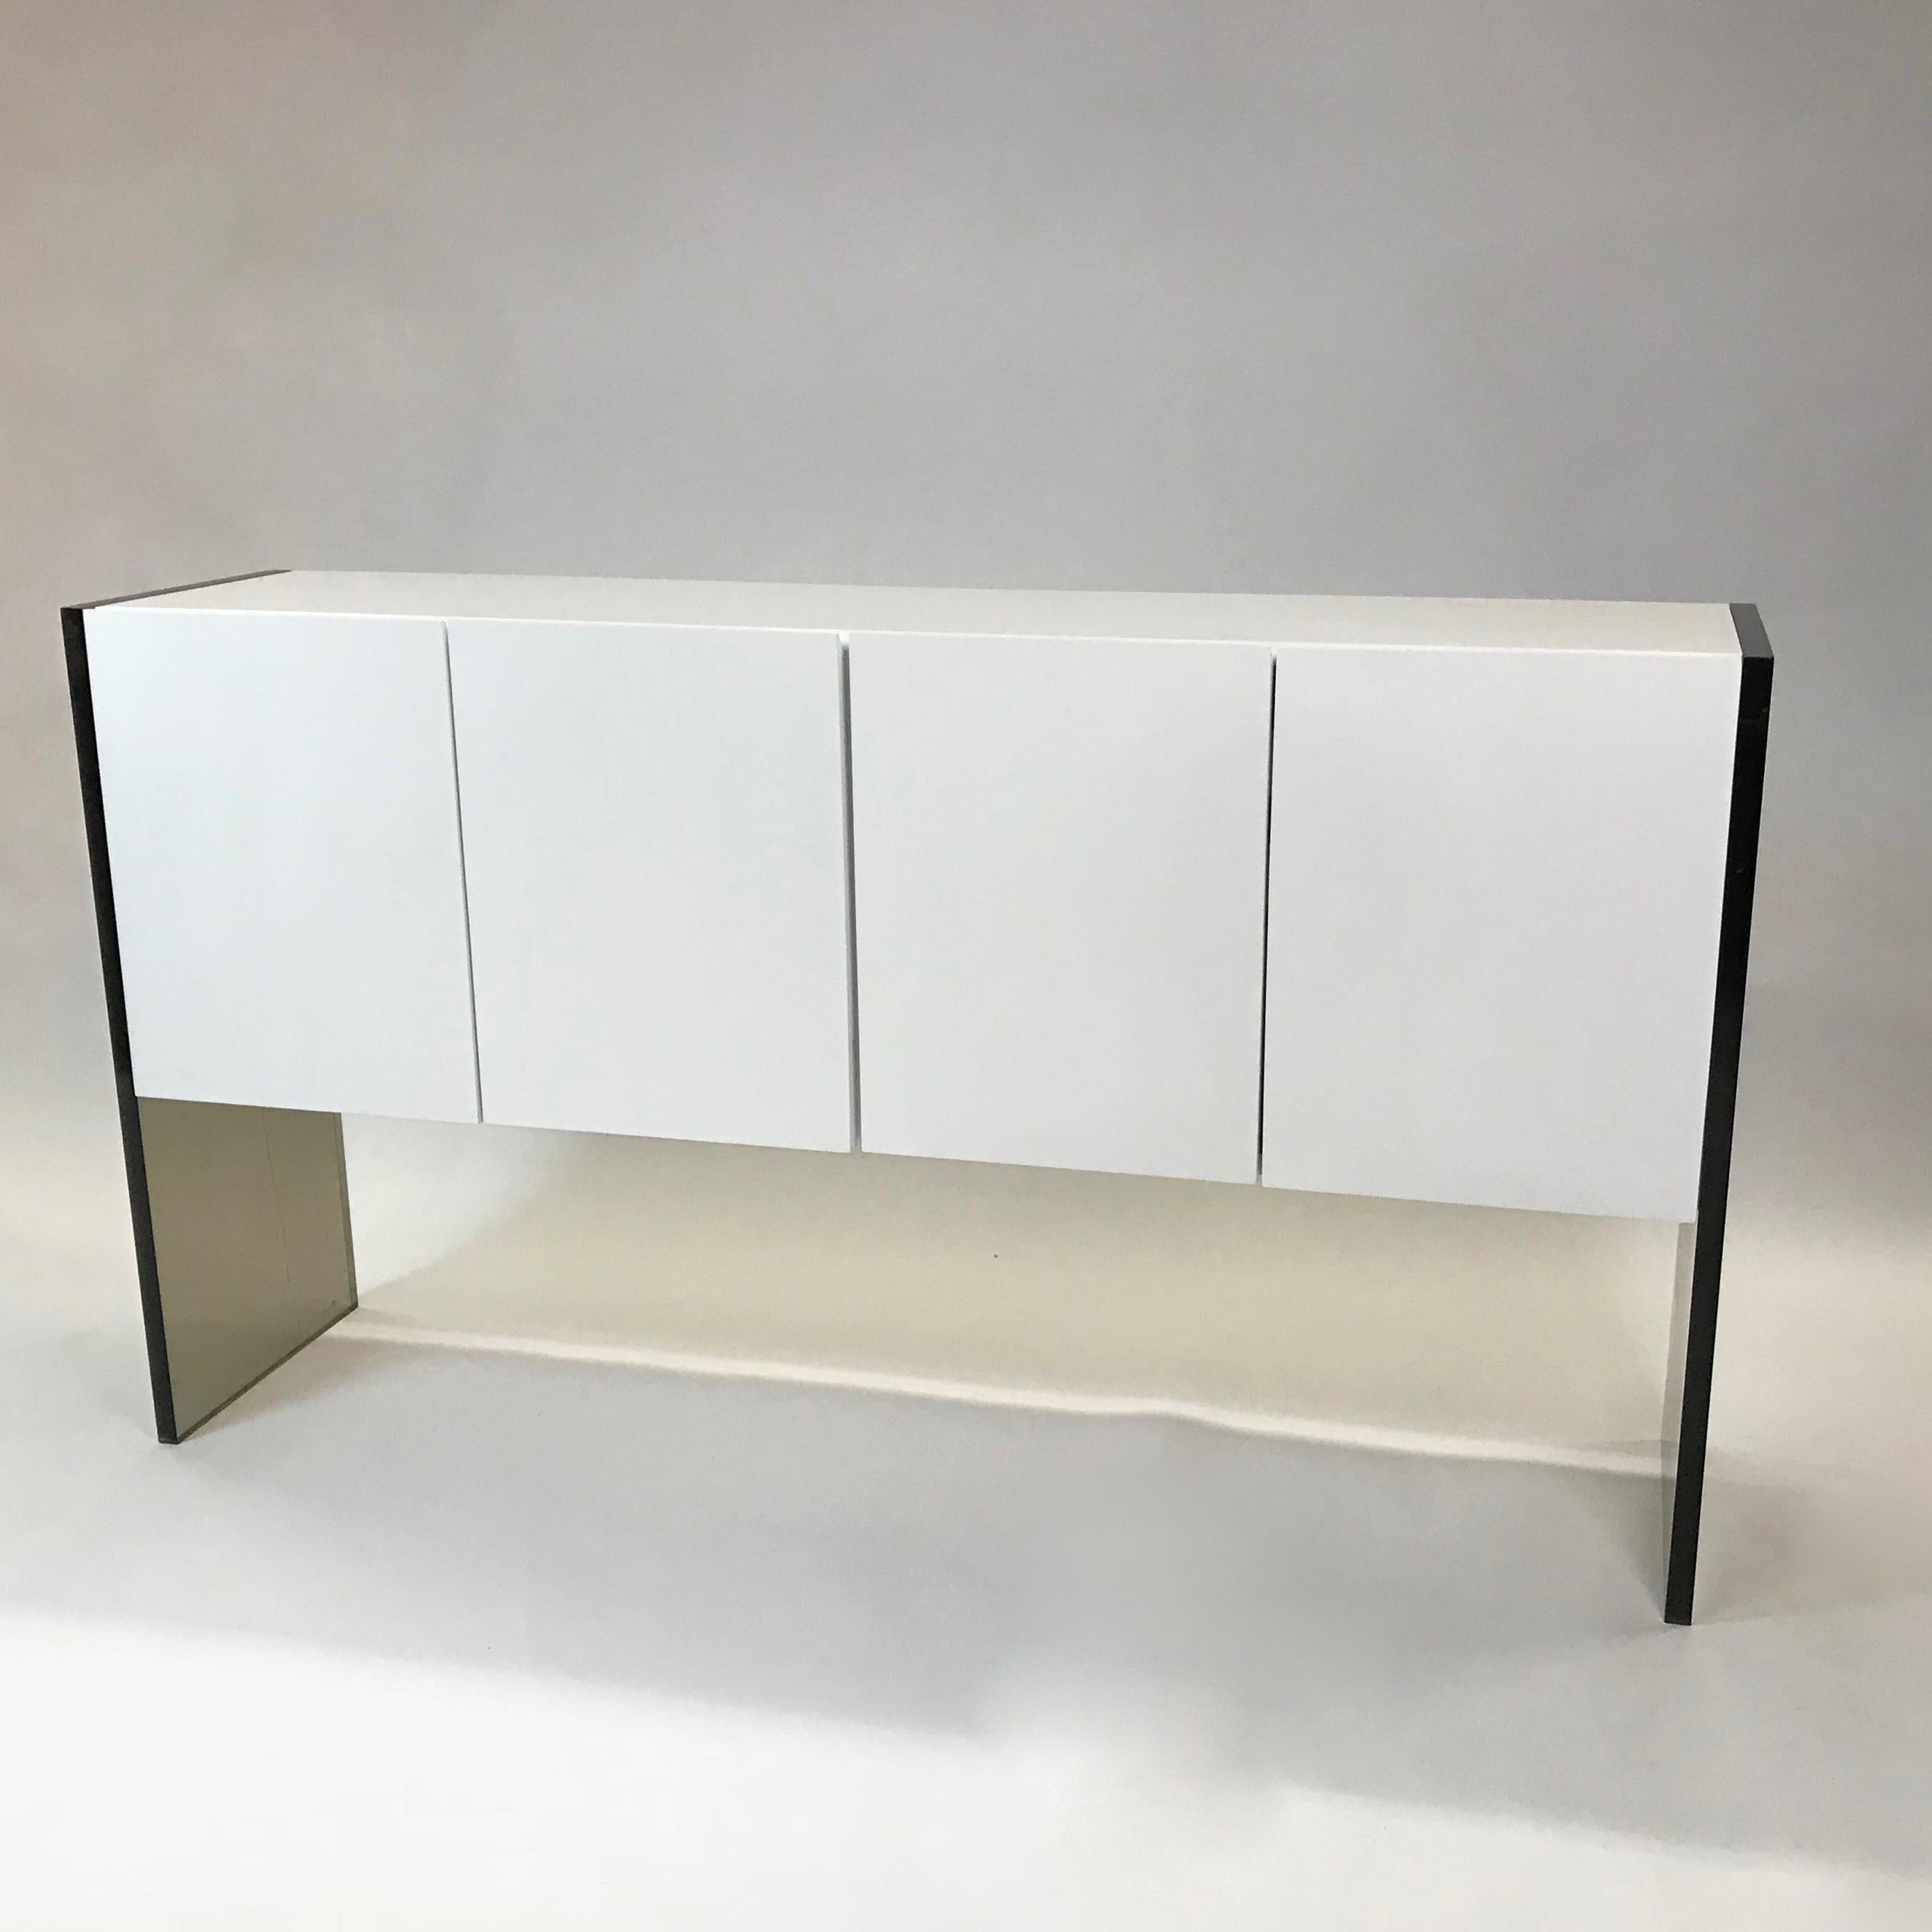 Minimal and chic, Mid-Century Modern, sideboard or credenza by Milo Baughman for Thayer Coggin features a clean white lacquered double cabinet with pull-out and smoked glass interior shelving contrasted by smoked Lucite side panels. The cabinet